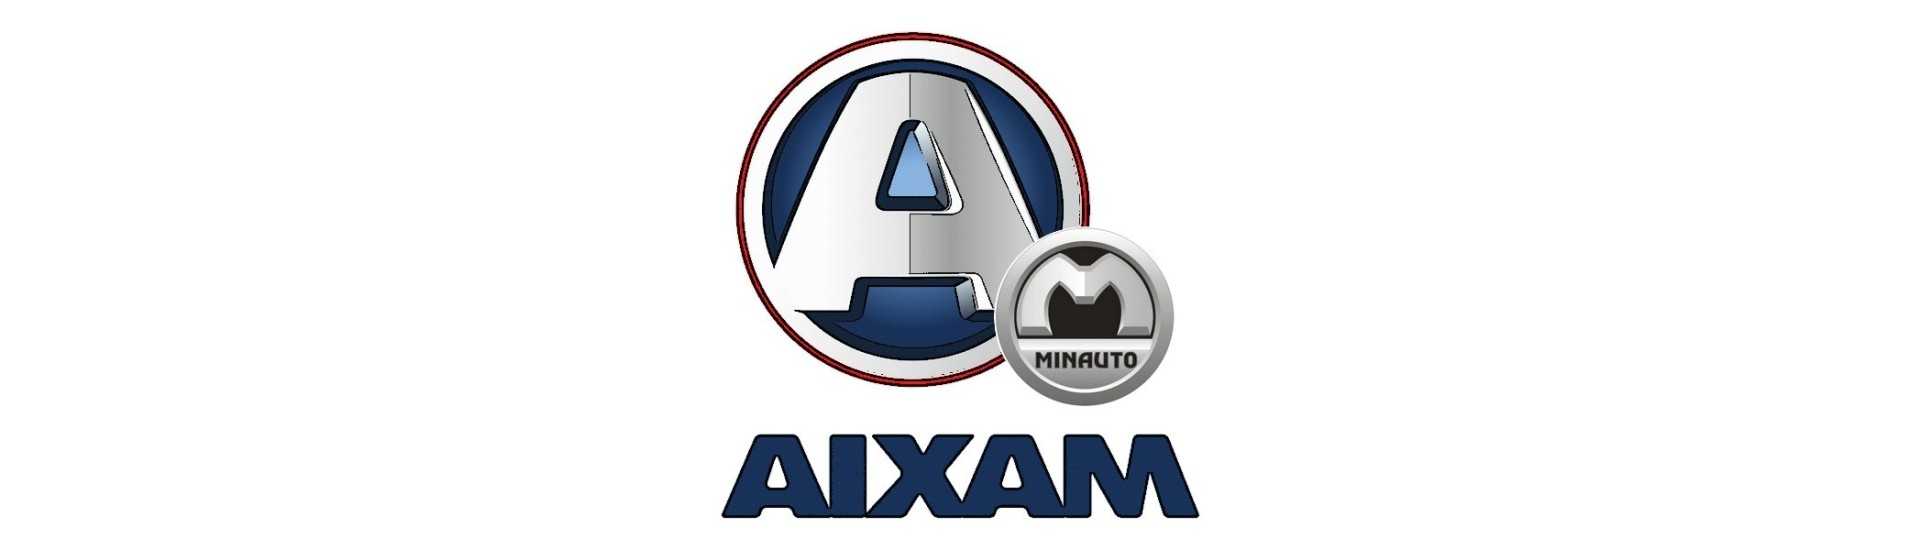 Ice wiper motor at best price car without license Aixam Minauto